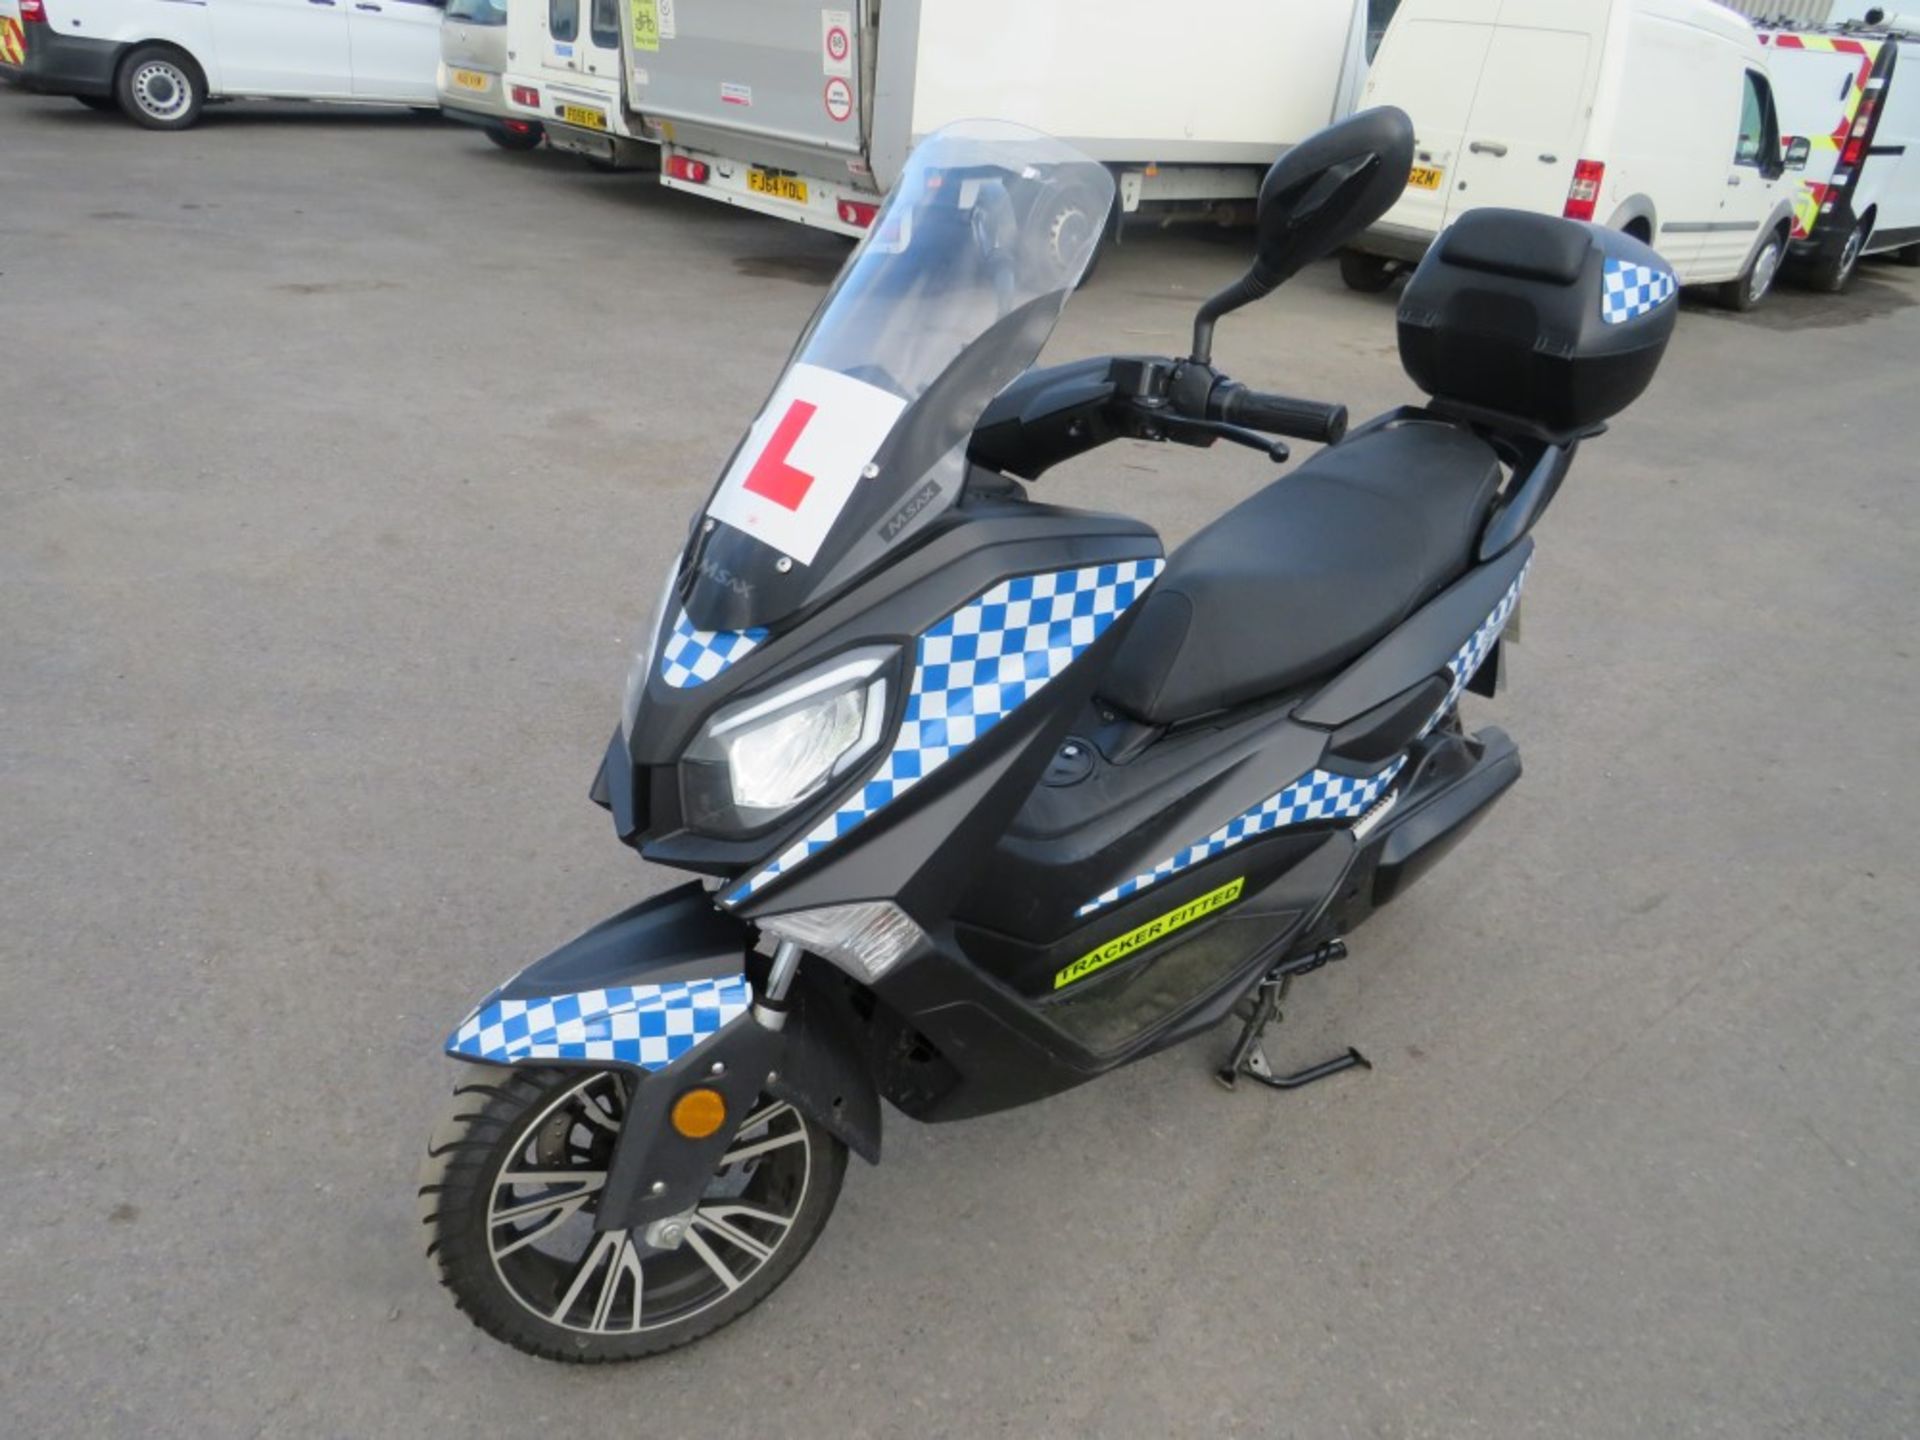 70 reg EFUN TIGER LYNX ELECTRIC SCOOTER, 1ST REG 10/20, MILEAGE NOT DISPLAYING, V5 HERE, 1 FORMER - Image 2 of 5